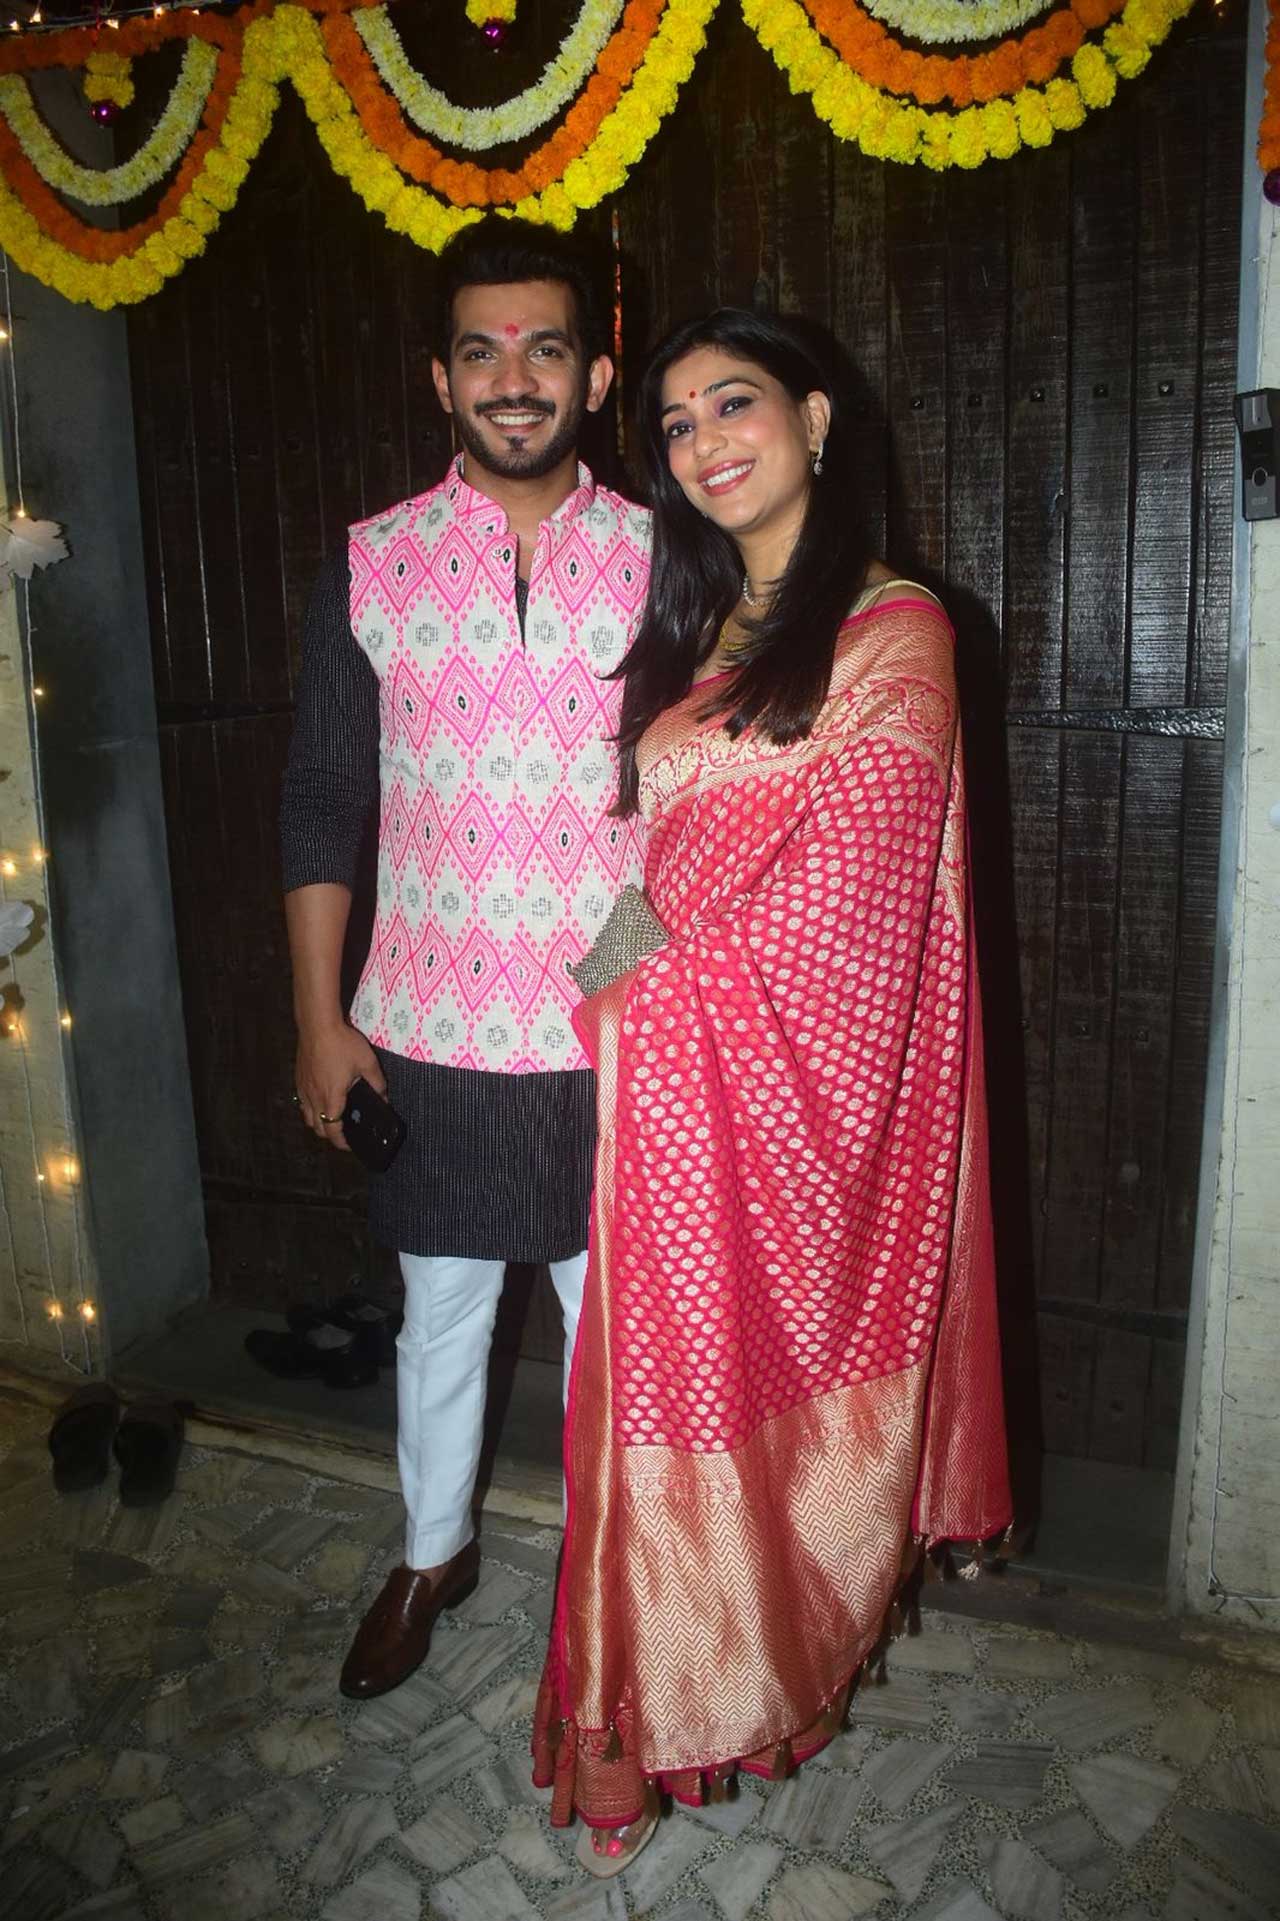 Khatron Ke Khiladi winner Arjun Bijlani arrived with wife Neha Swami. The couple complemented each other with outfits in shades of pink. 